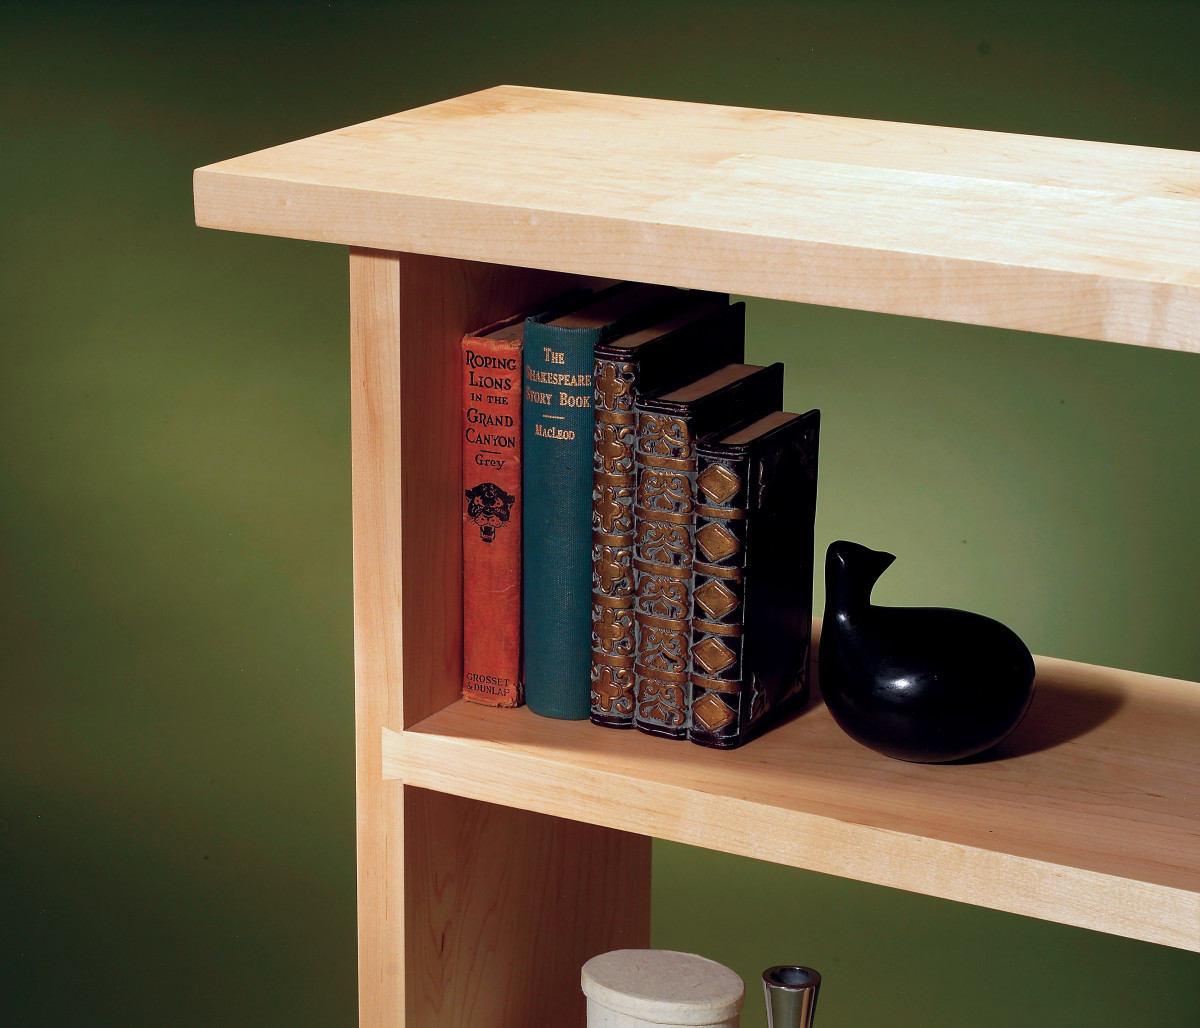 What book shelf or display cabinet works well if you have a big